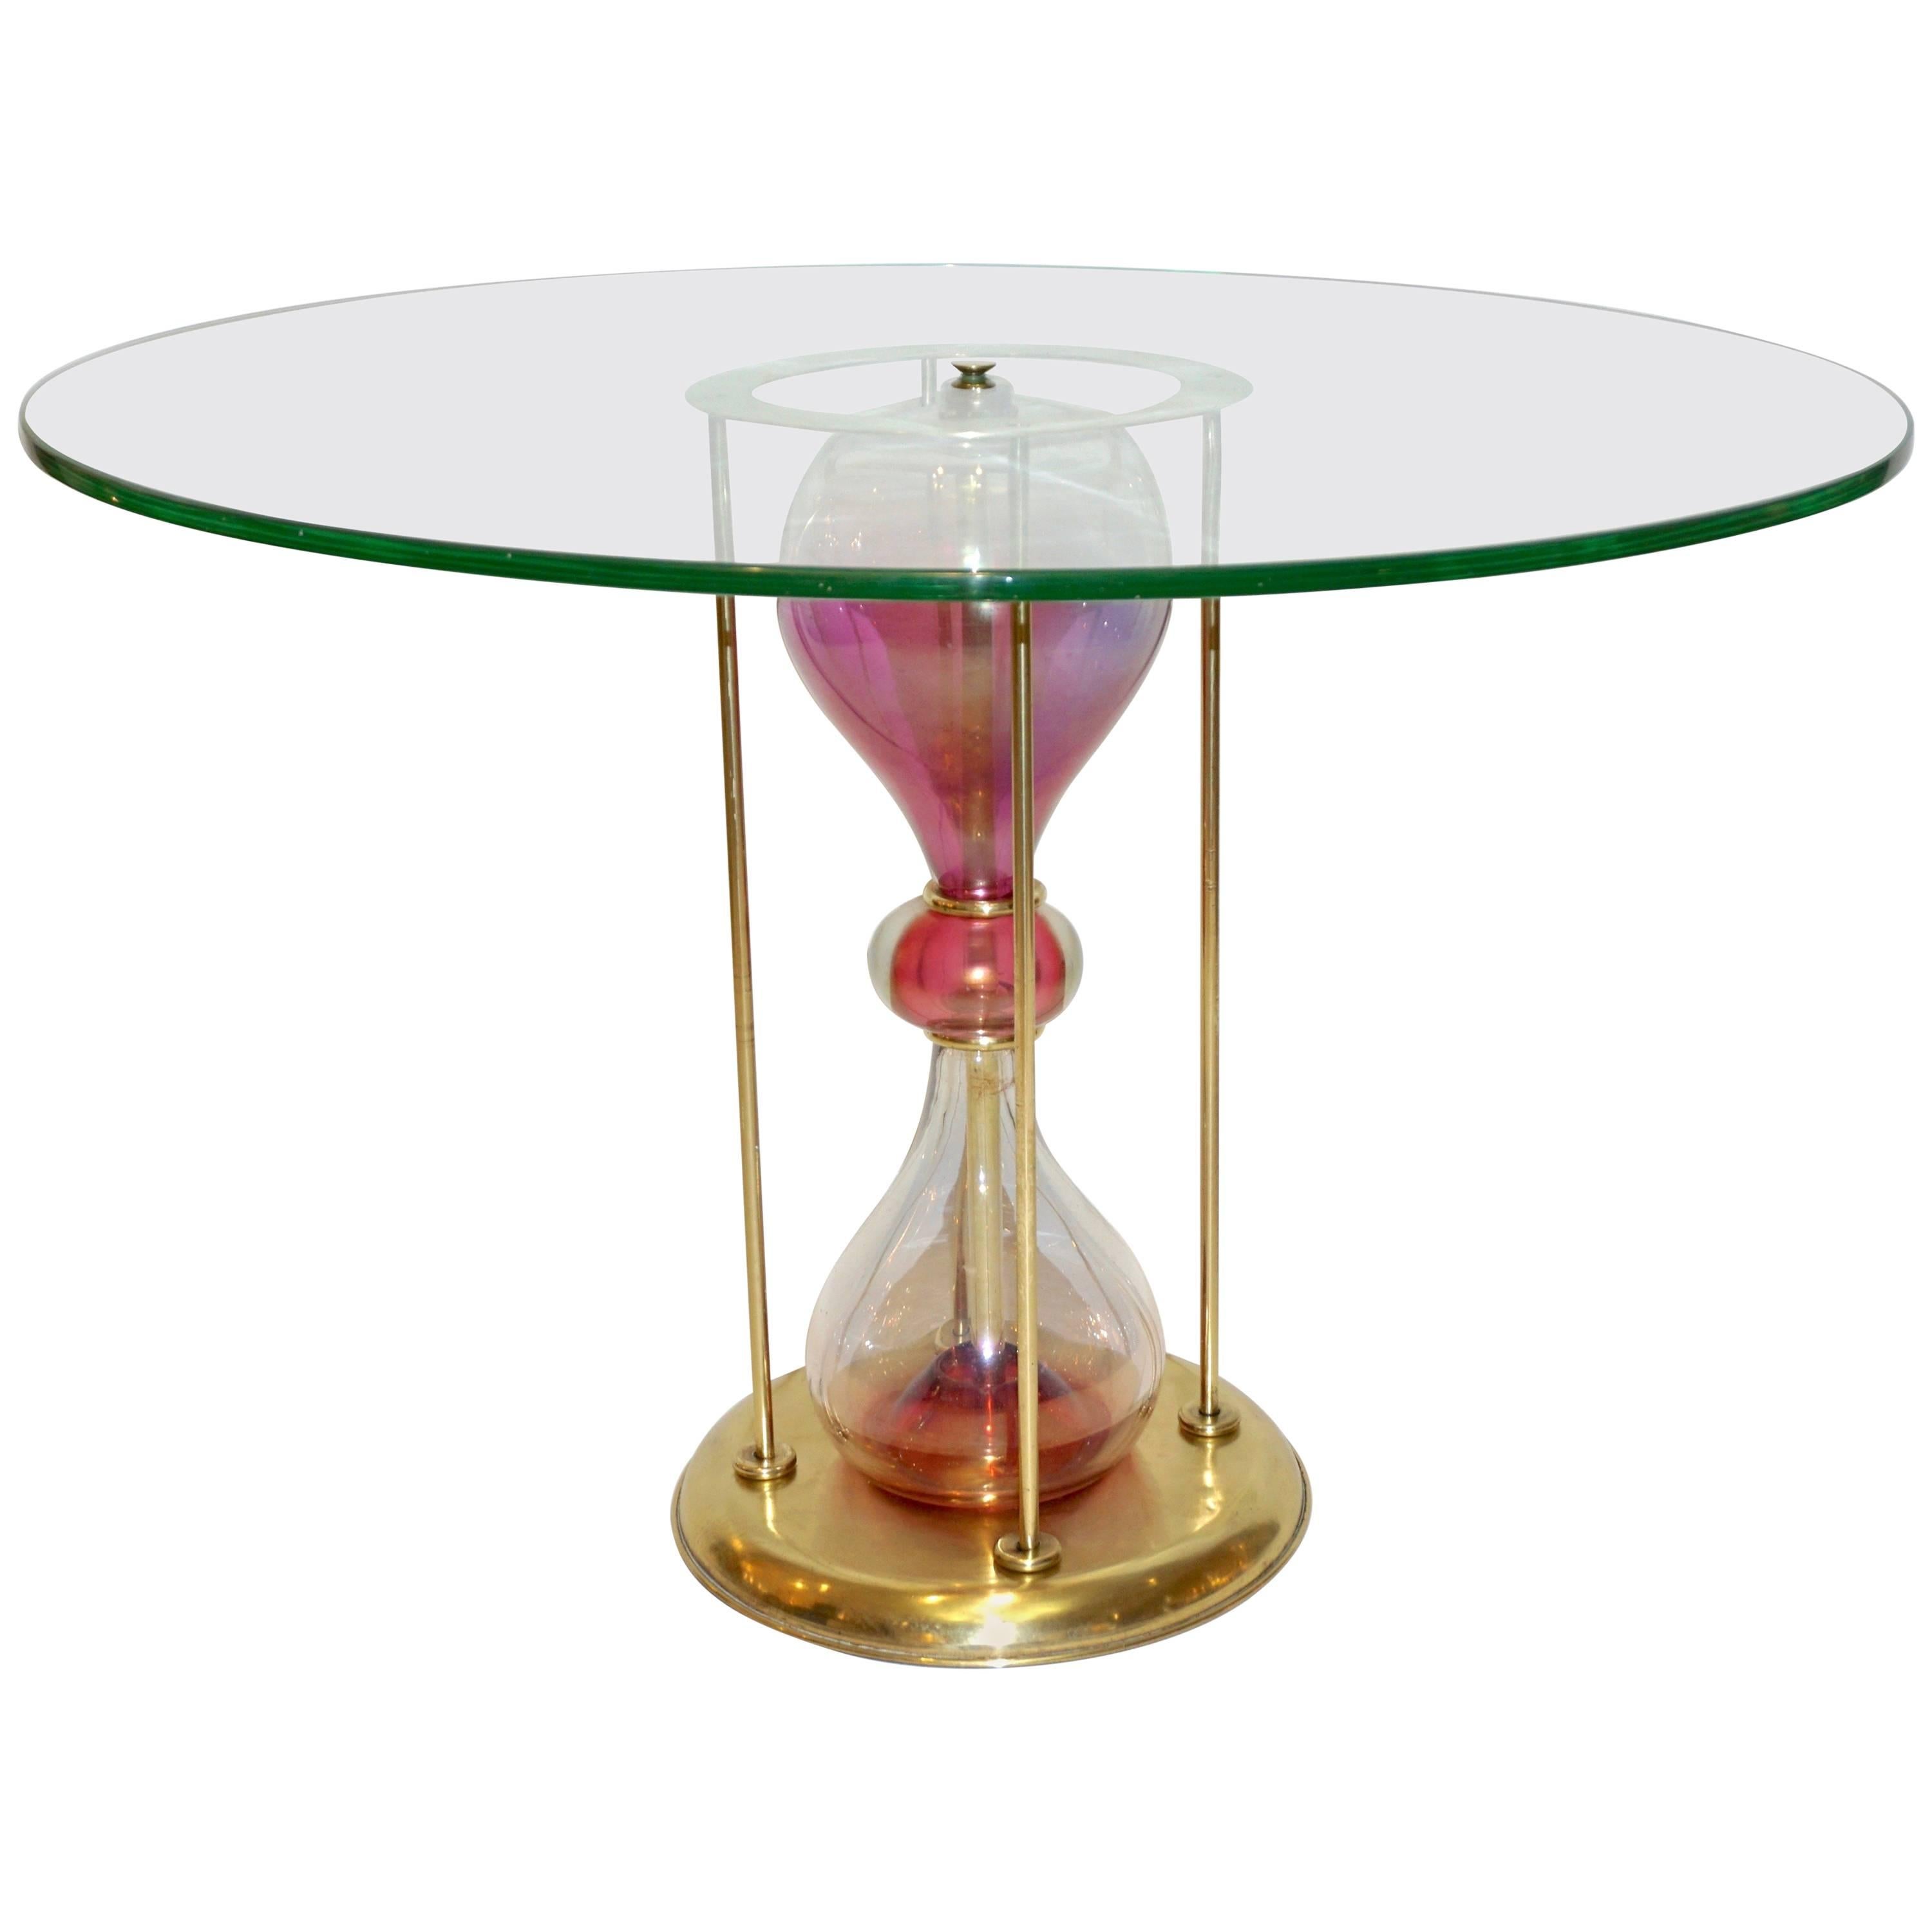 Seguso Vetri d'Arte, 1960s Italian Brass and Pink Glass Round Side/End Table